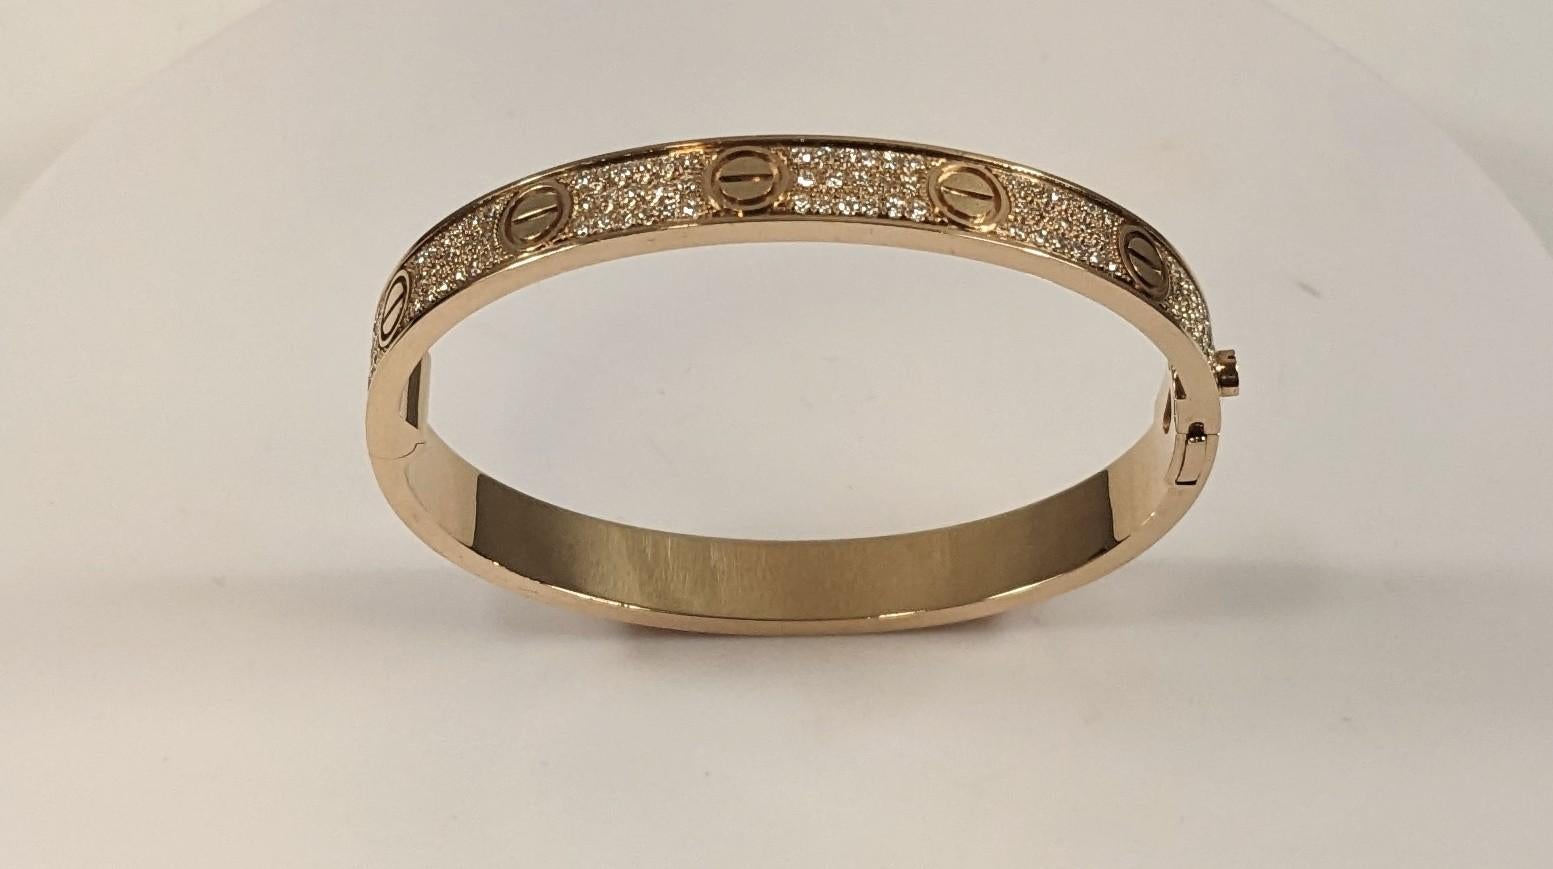 CARTIER LOVE BRACELET
Cartier 'Love' bangle bracelet crafted in 18k rose gold with gold screw tops and pave set round brilliant cut diamonds (D-F in color, VVS clarity)
Signed Cartier,  750, with serial number and hallmarks 
The bracelet is